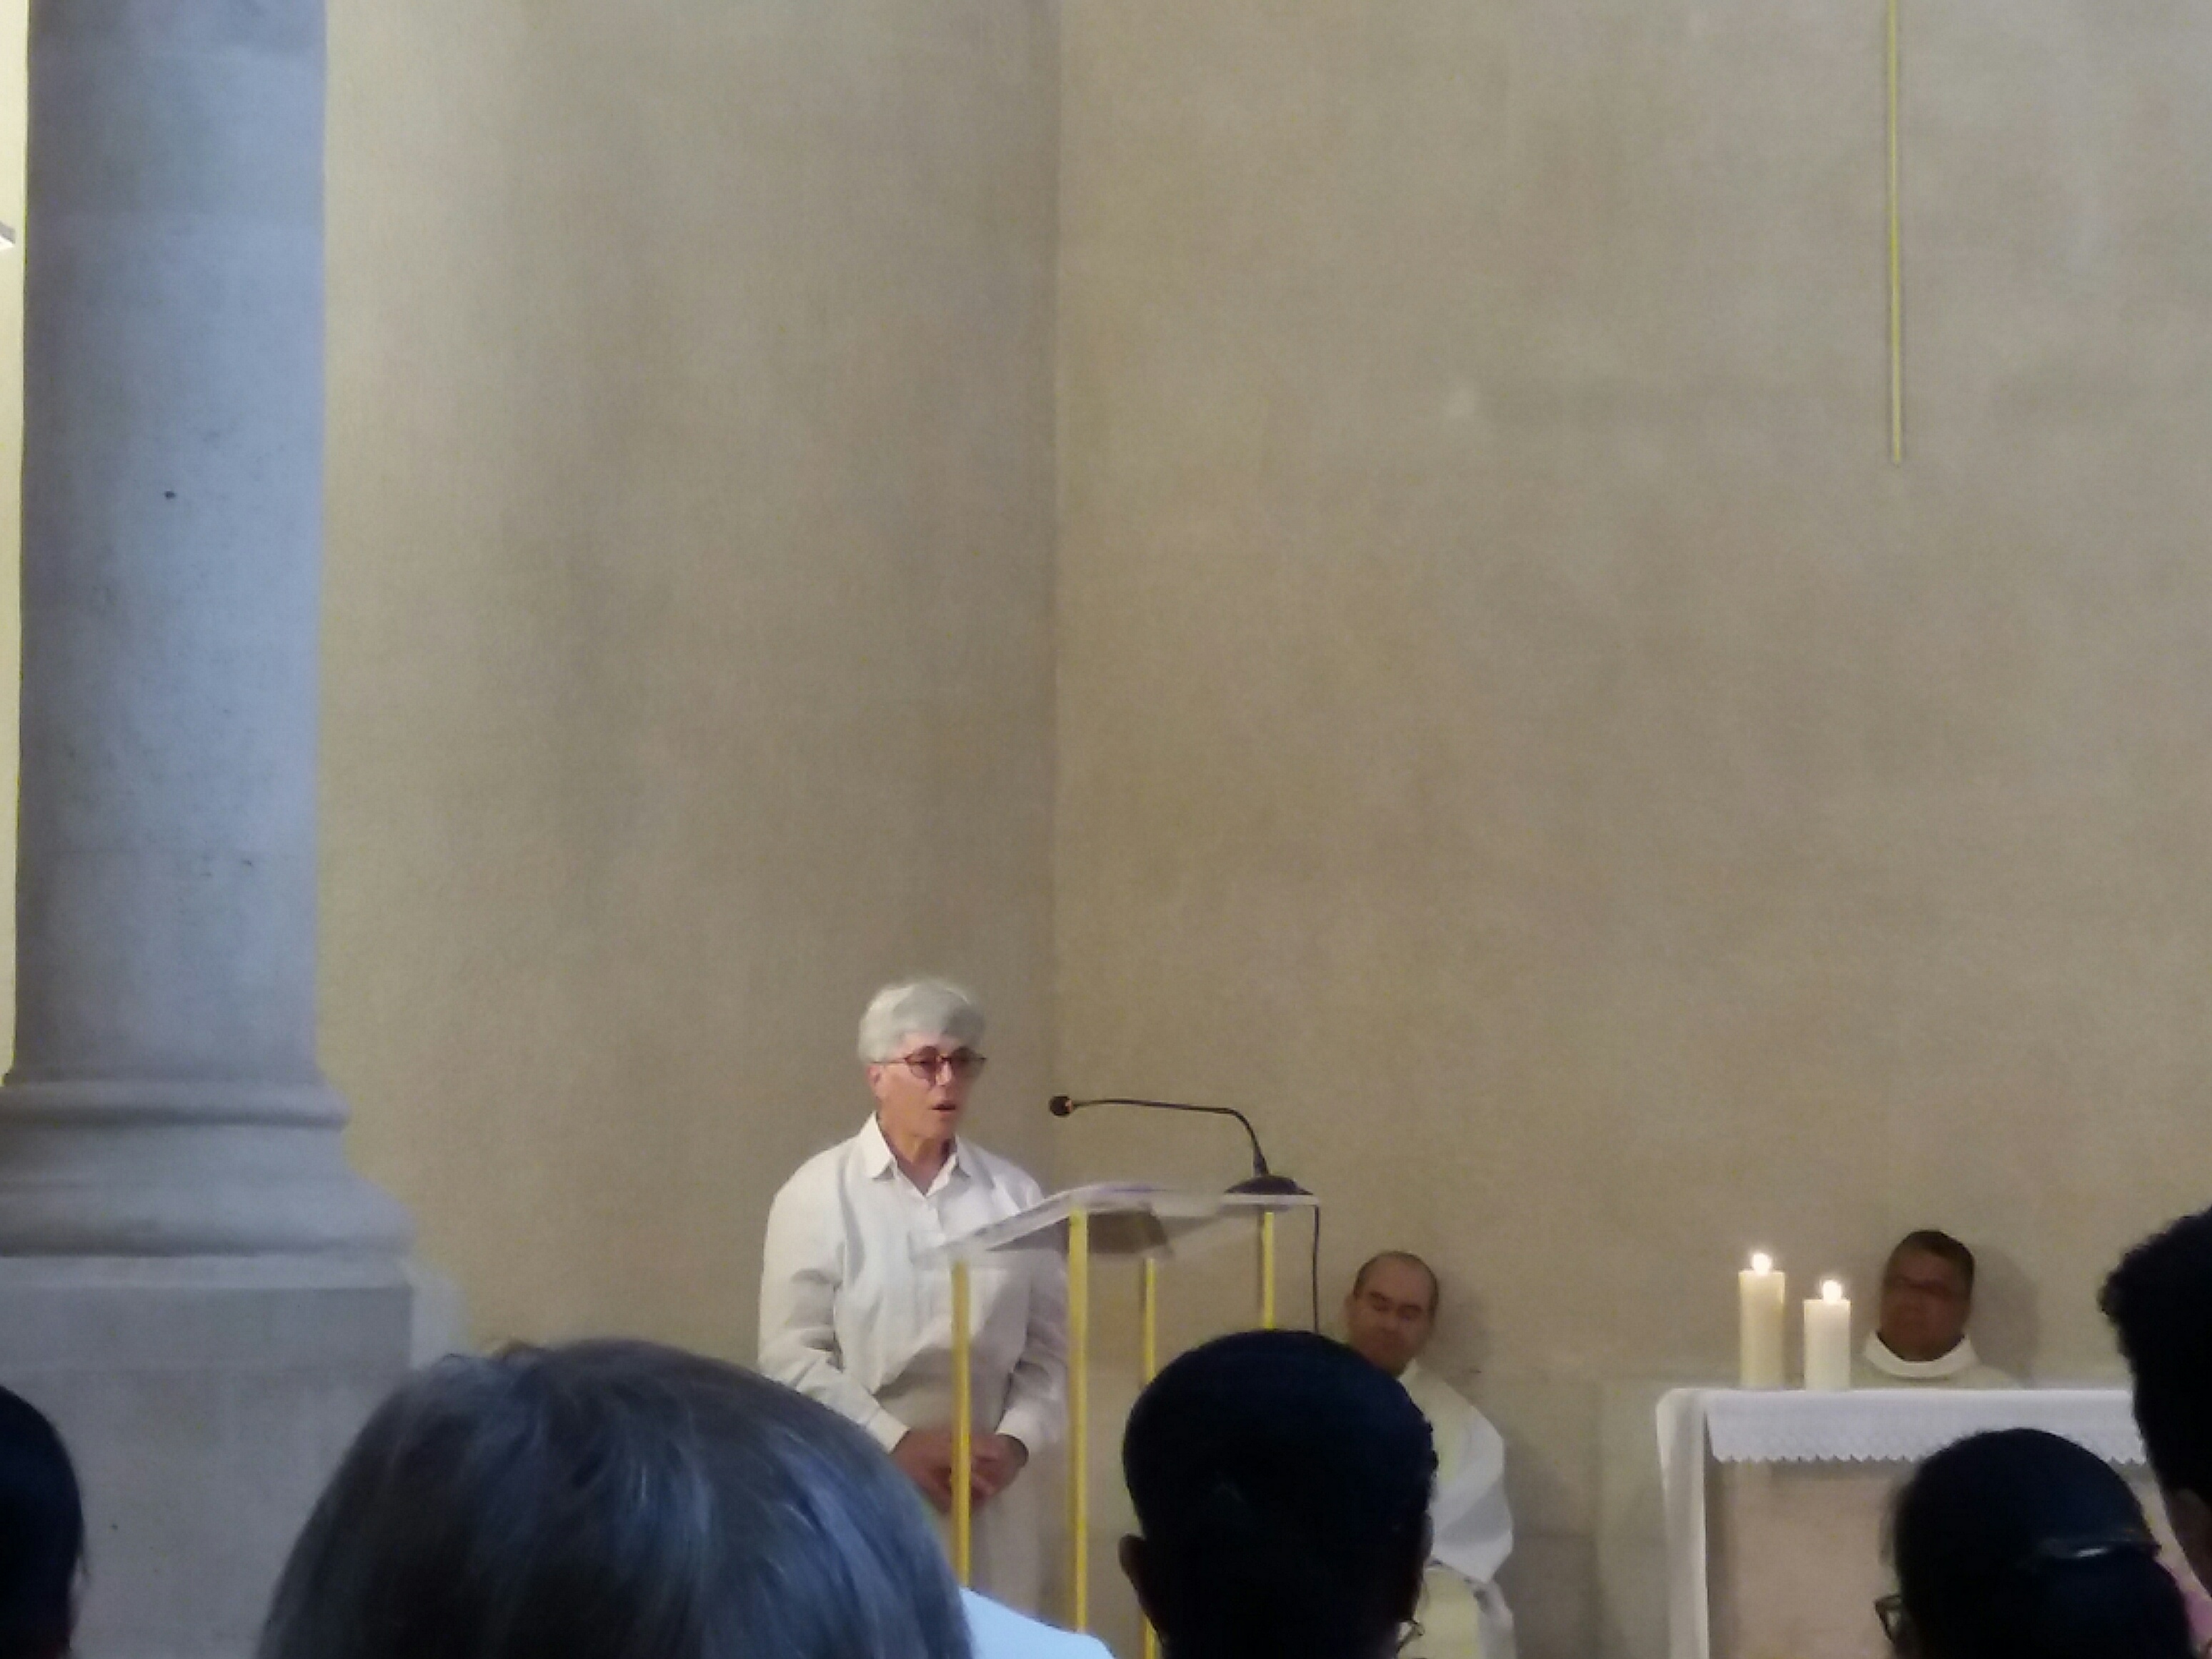 Sion Sister celebrates golden jubilee of religious life.